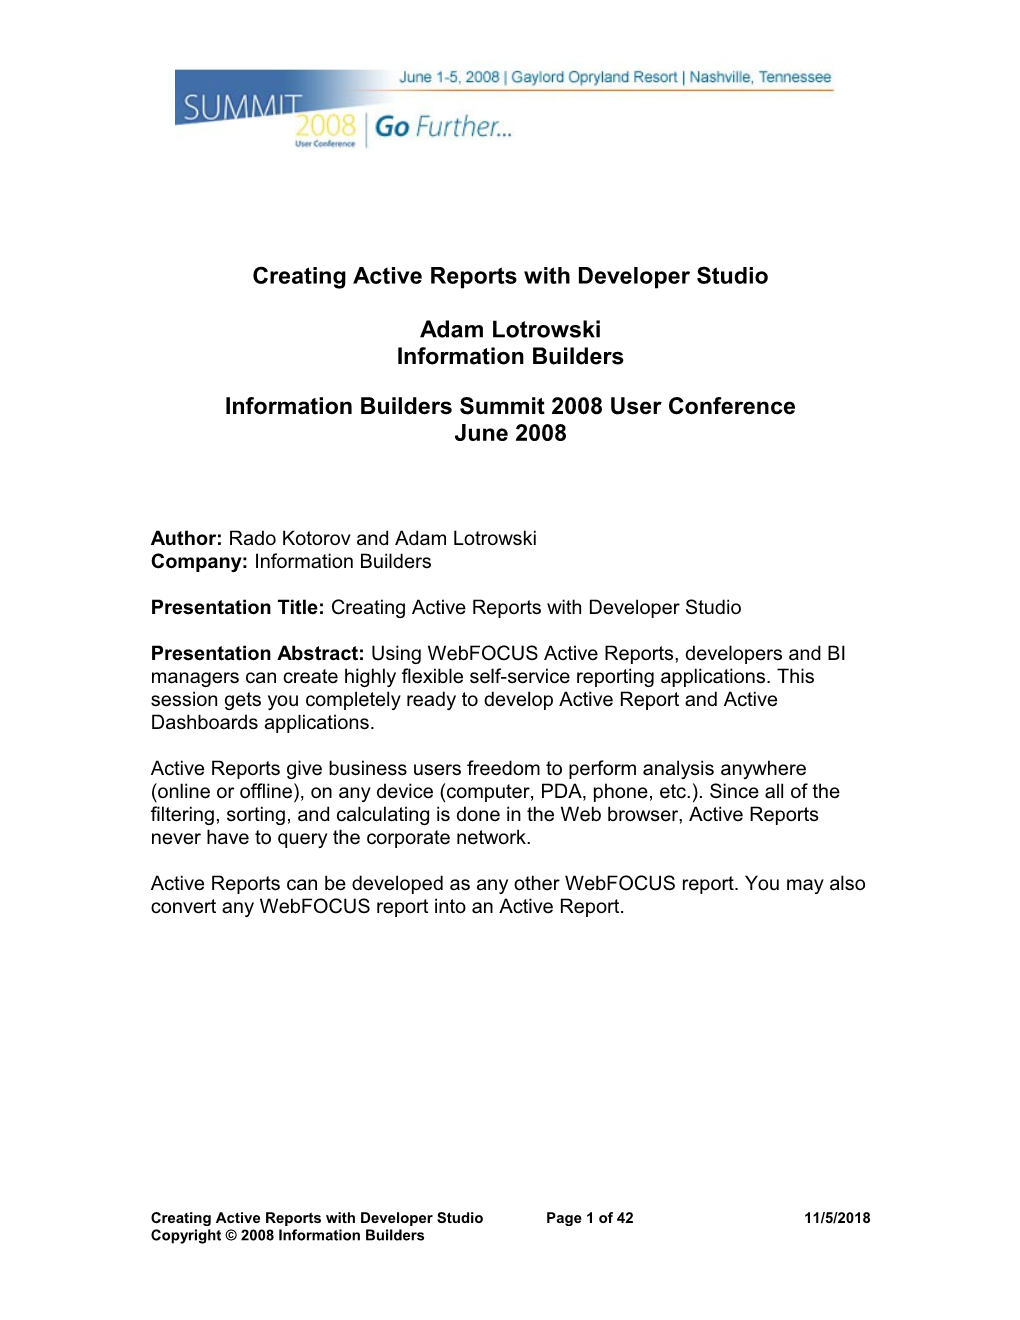 Developing Active Reports